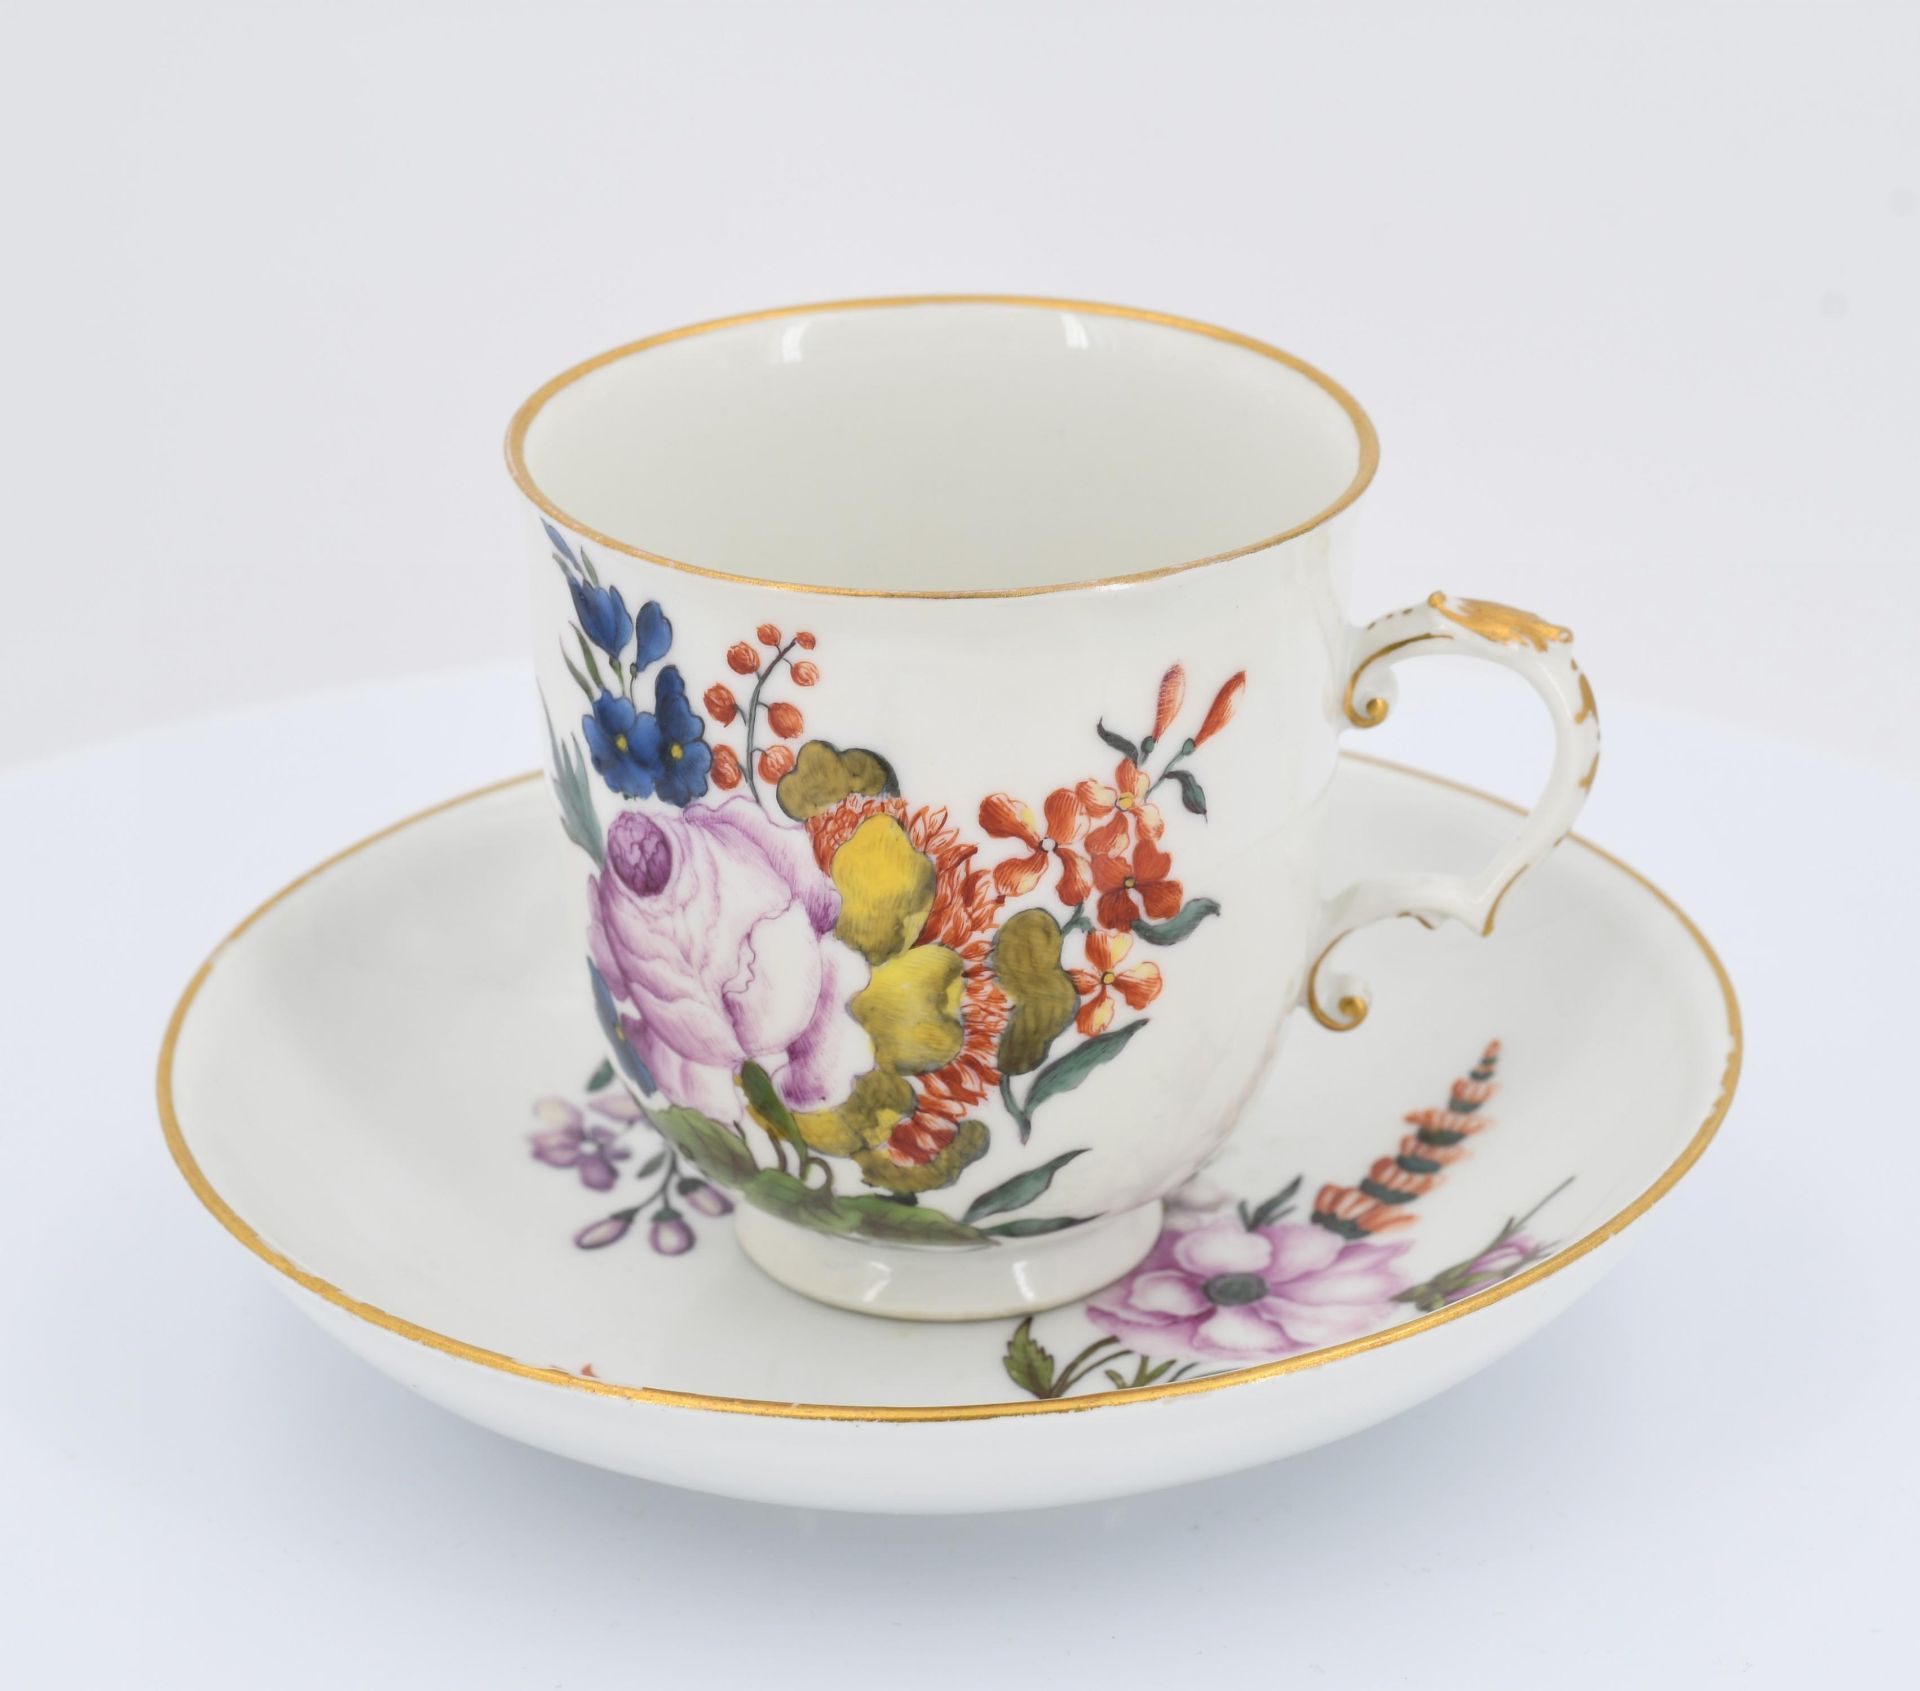 Cup and saucer with floral décor - Image 2 of 7